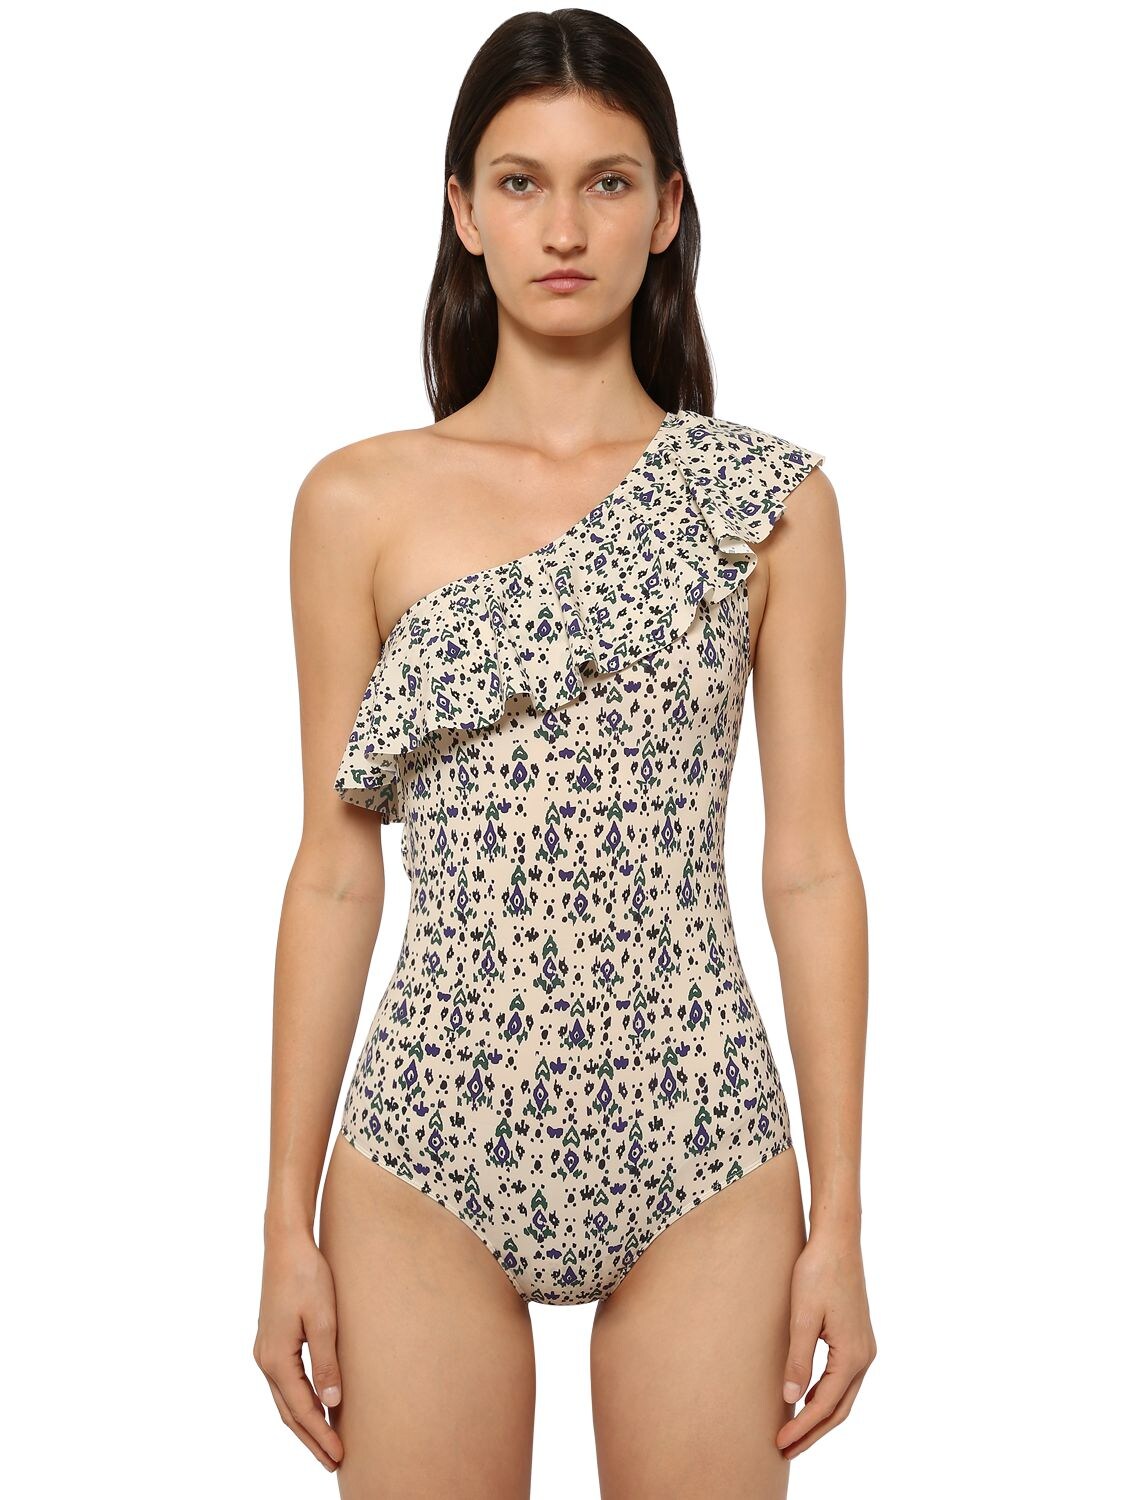 ISABEL MARANT ÉTOILE CECILIA PRINTED LYCRA ONE PIECE SWIMSUIT,71ICDC001-MJNFQW2